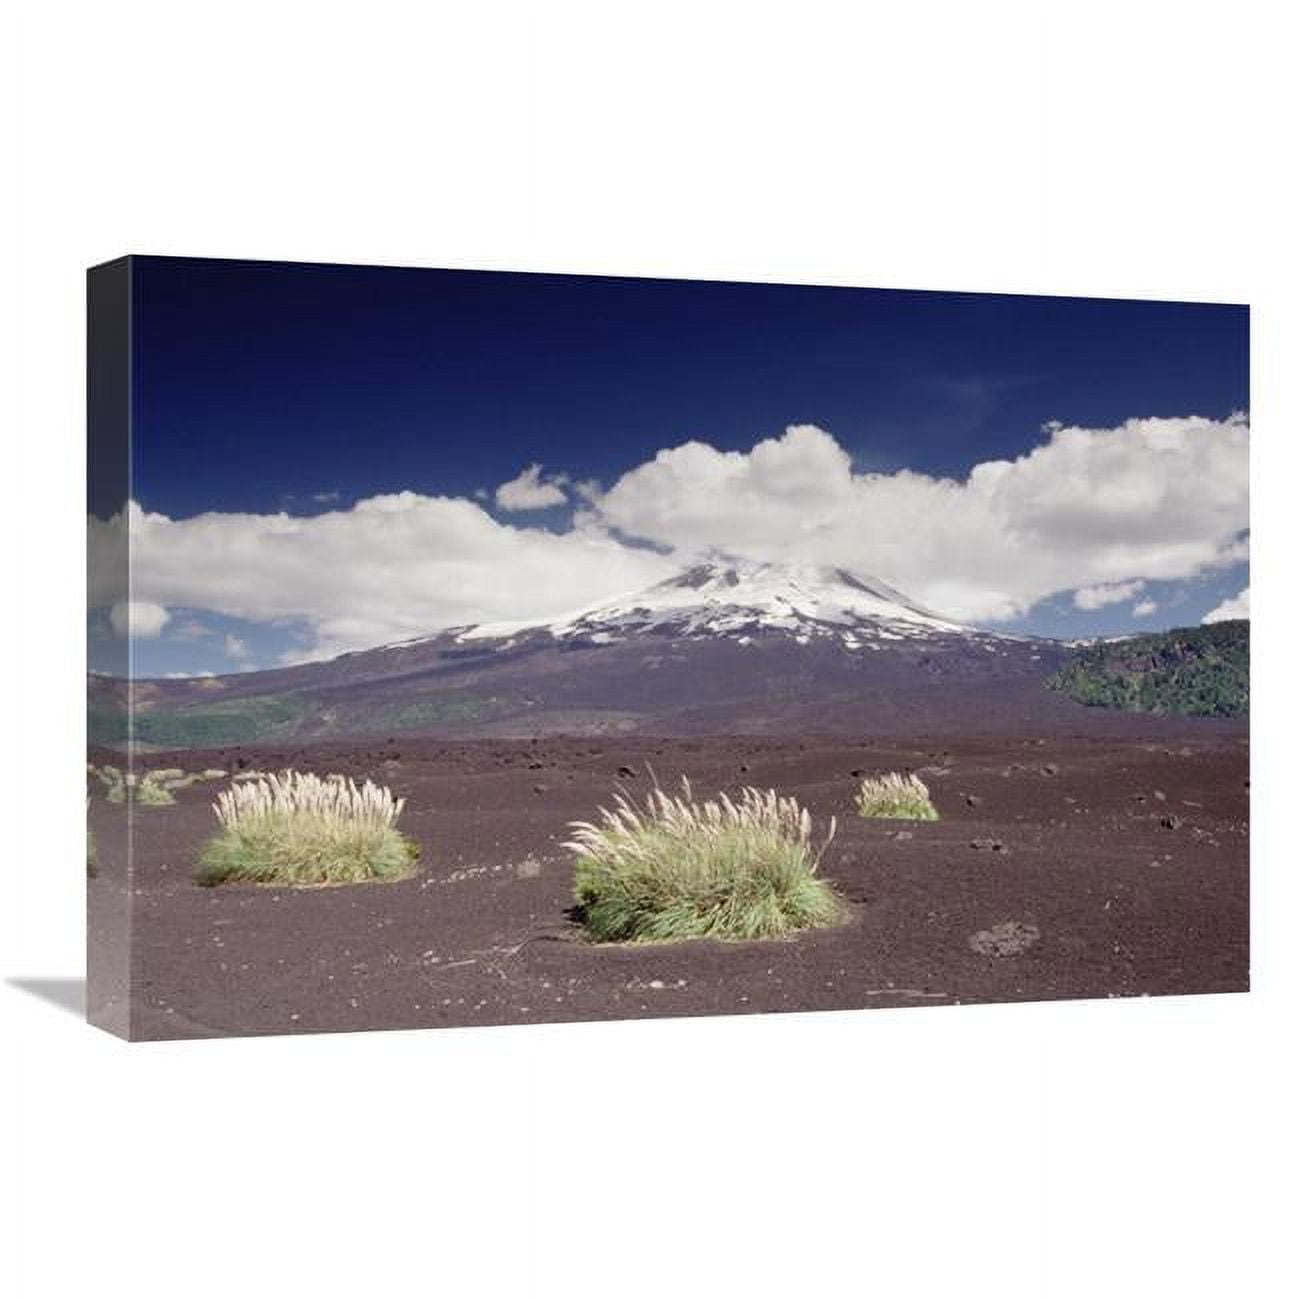 GCS-453013-1624-142 16 x 24 in. Pampas Grass Islands in Old Lava Flowl Llaima Volcano, Conguillio NP, Chile Art Print - Gerry Ellis -  Global Gallery